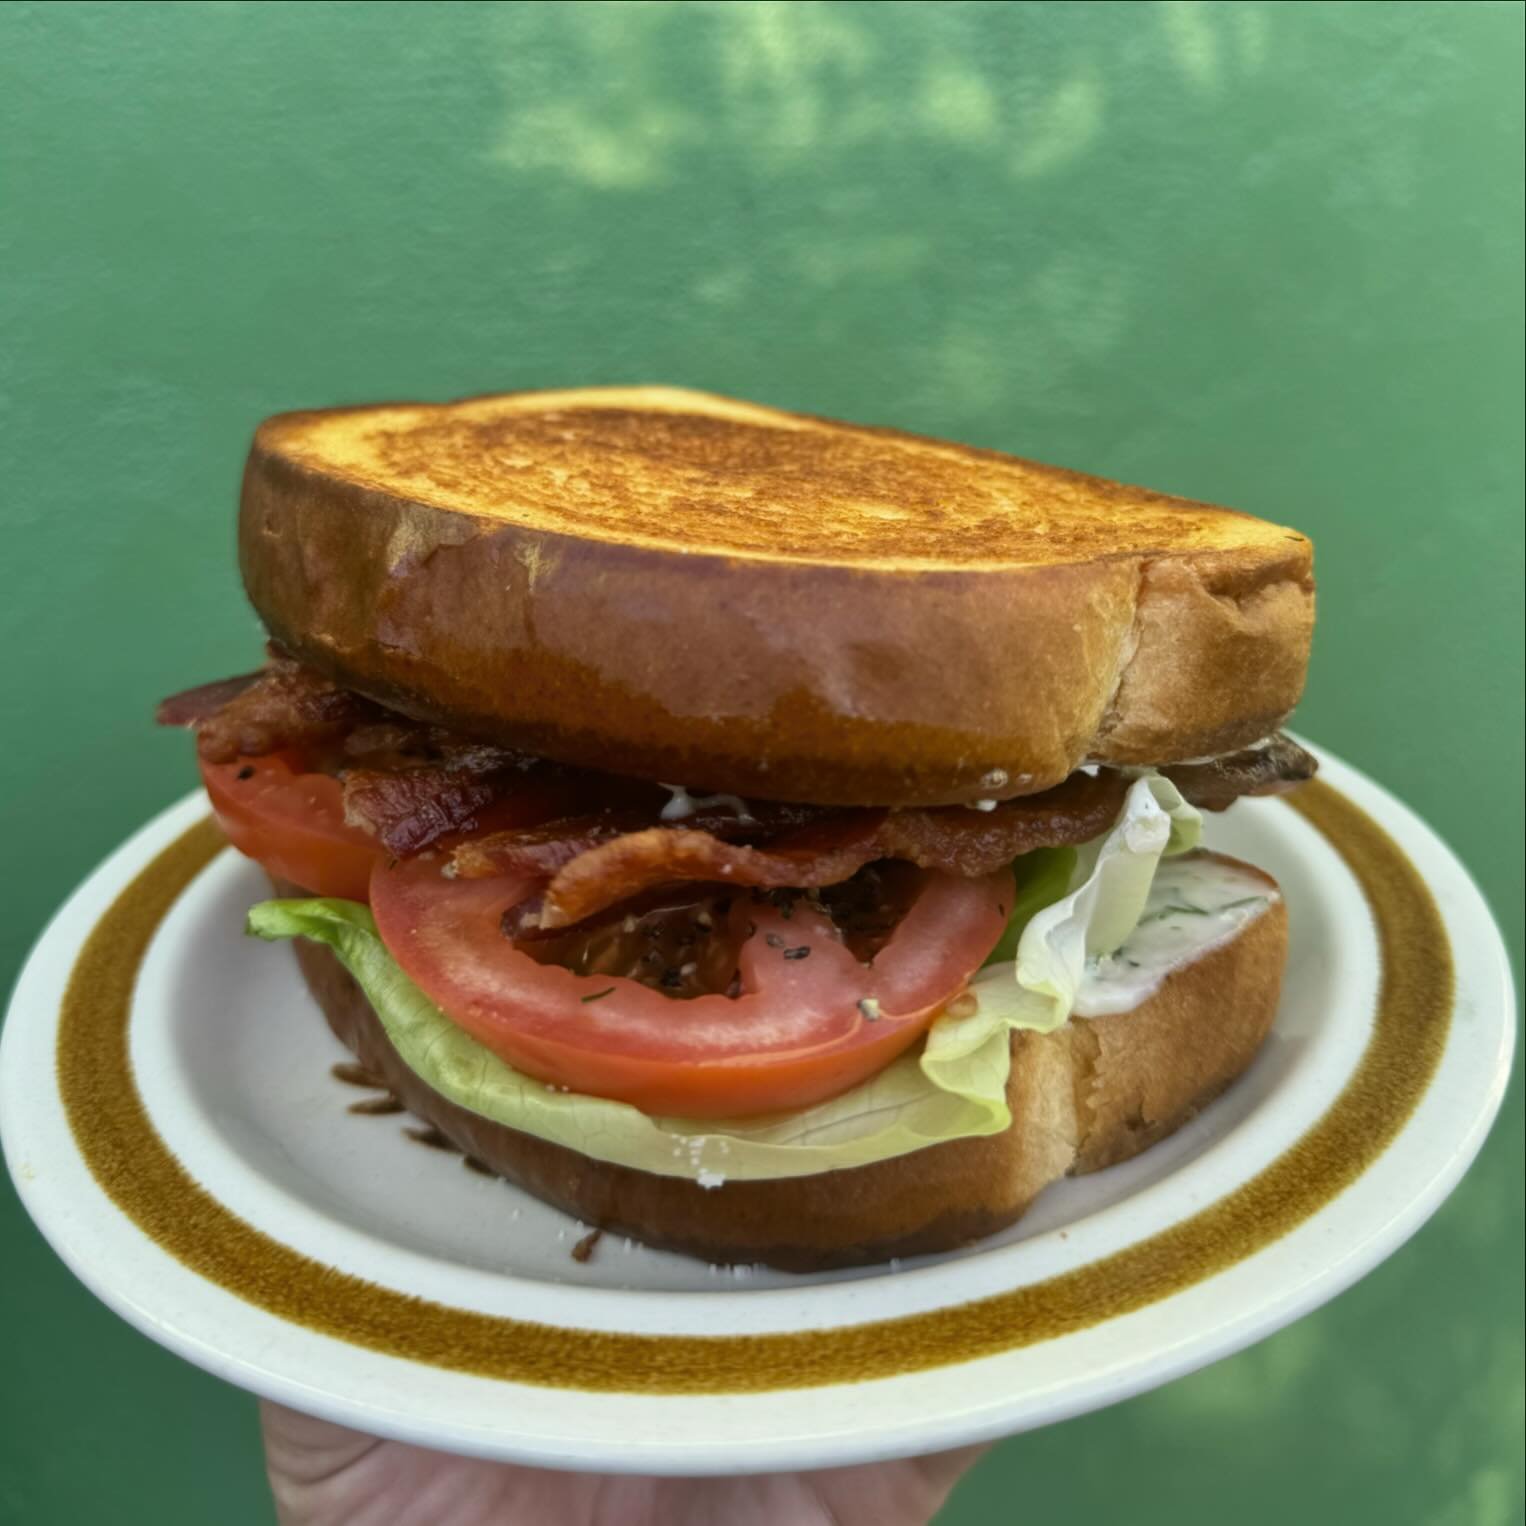 This week we have a heirloom tomato BLT! Dill and sunflower seed aioli and butter leaf lettuce on thick cut bread with tomato and bacon. Come on by and try it @dragoonbrewing @casavideoandfilmbar @tapandbottle